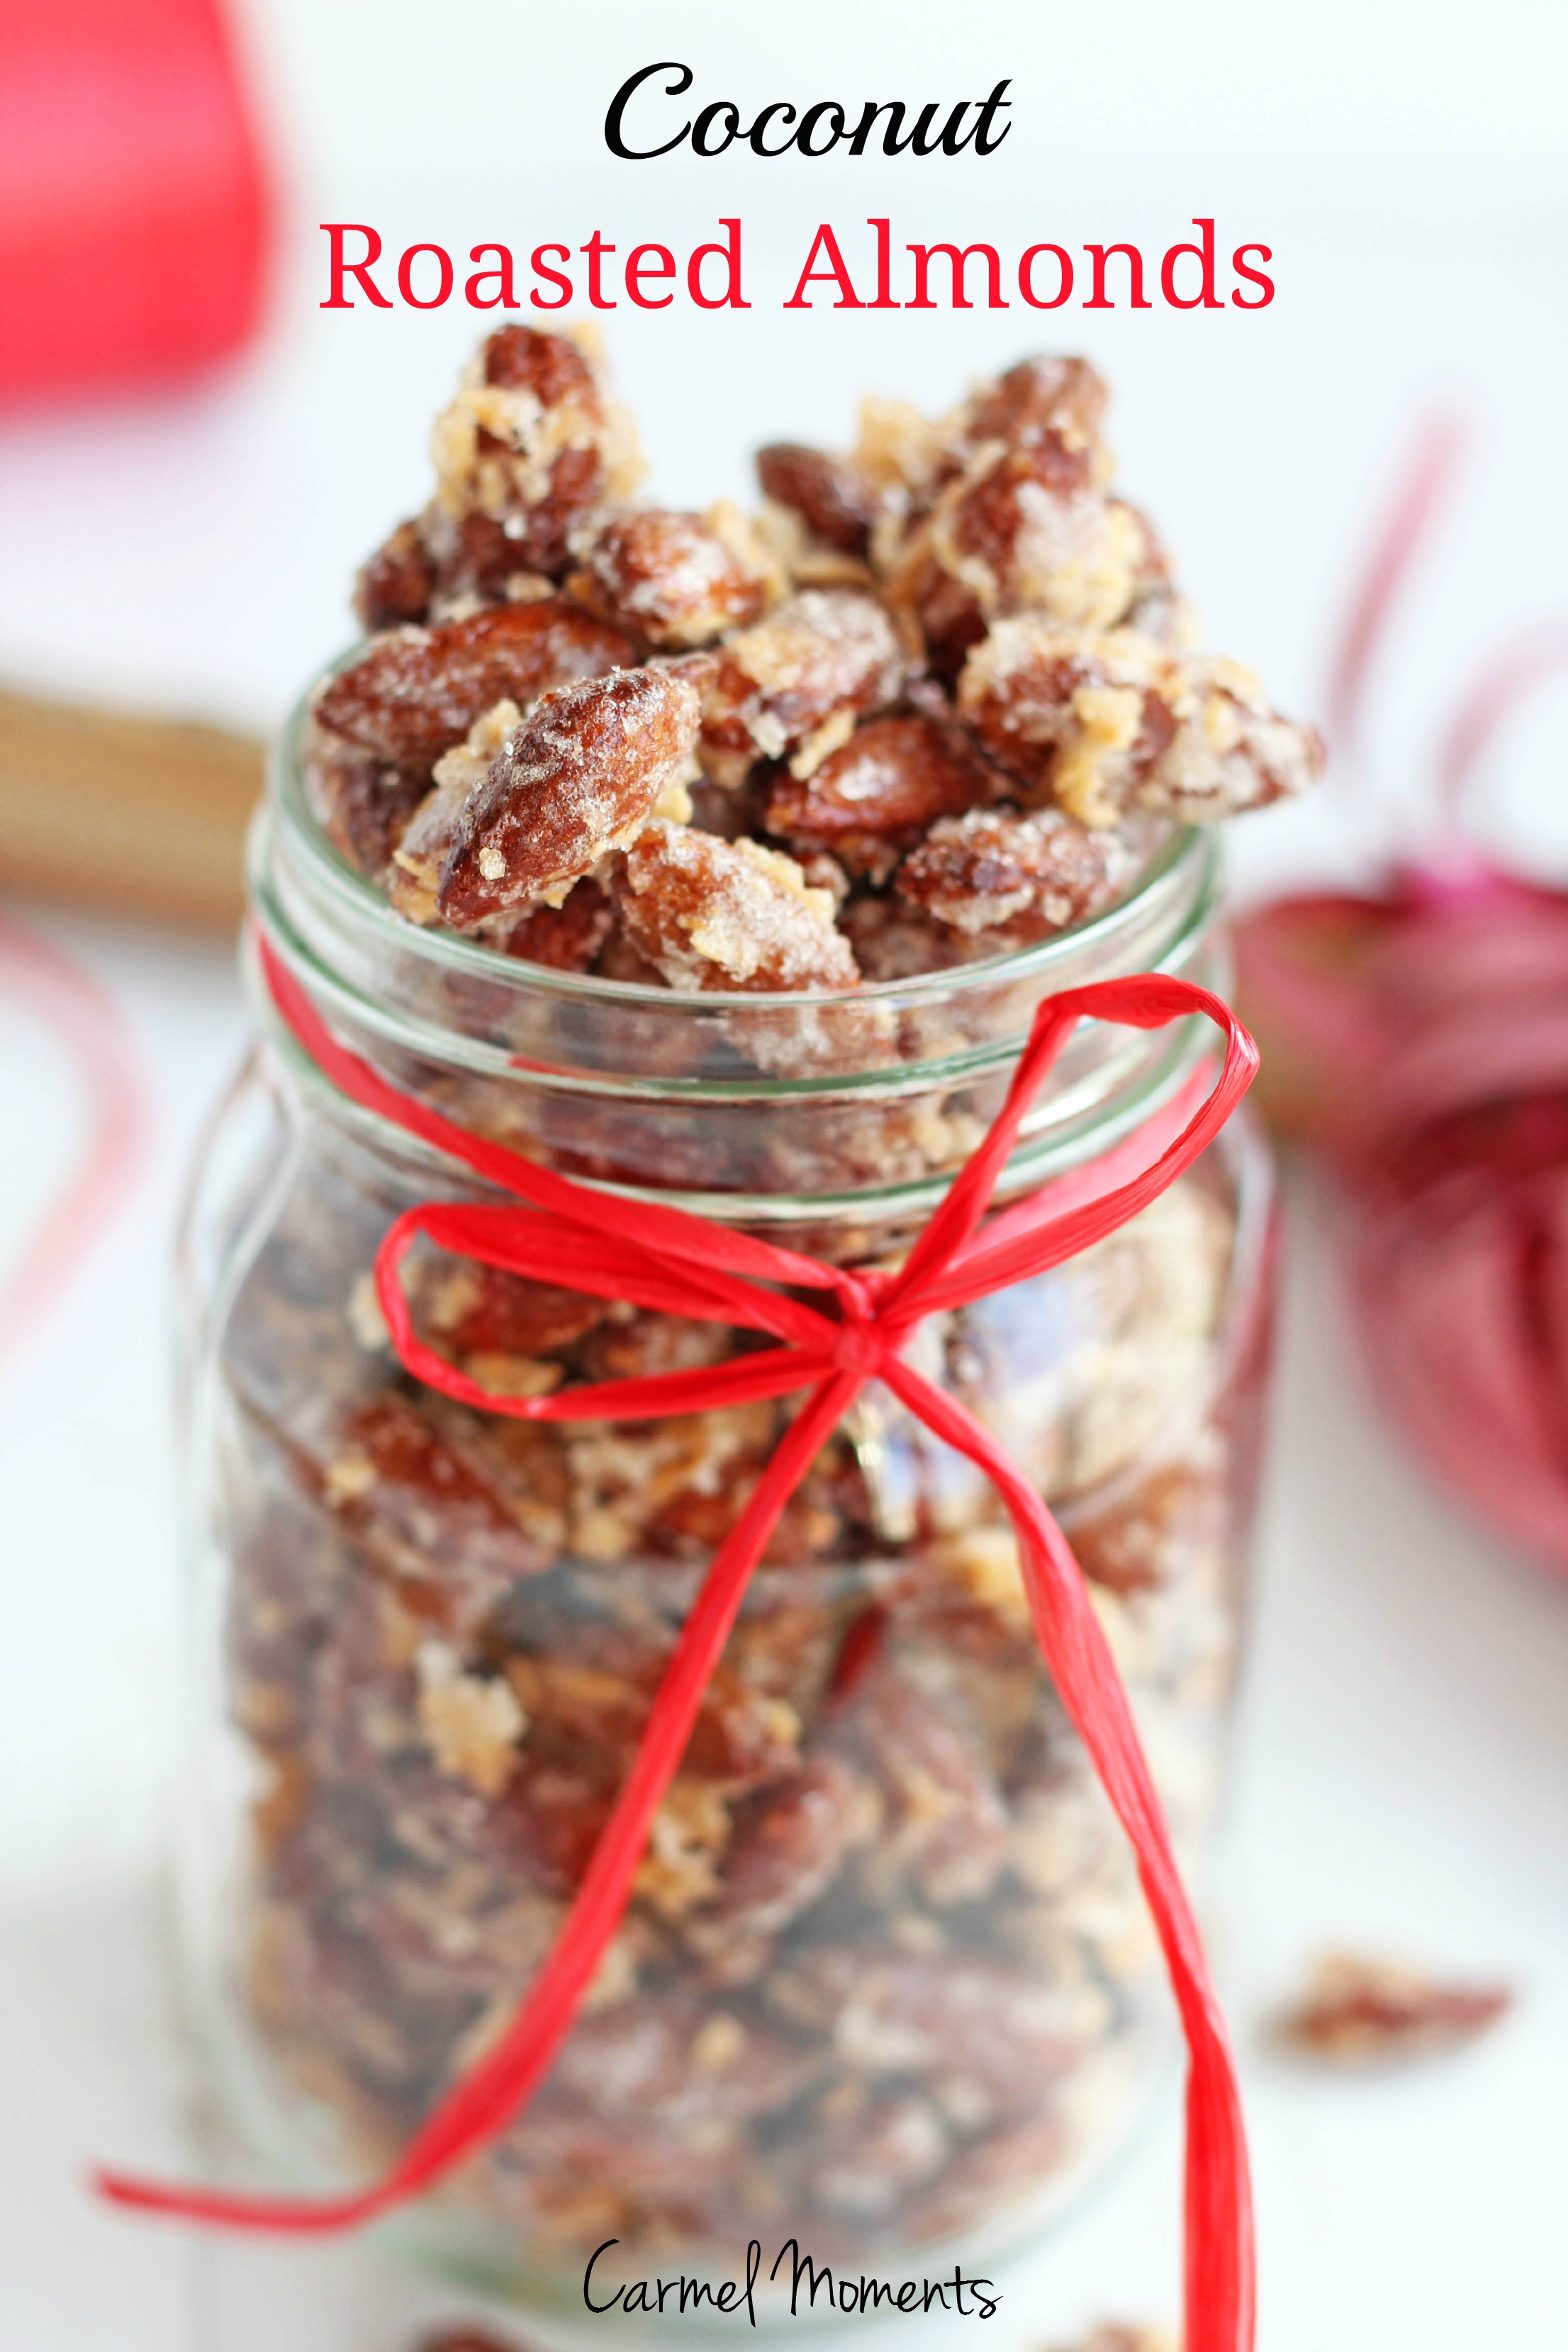 Coconut Roasted Almonds